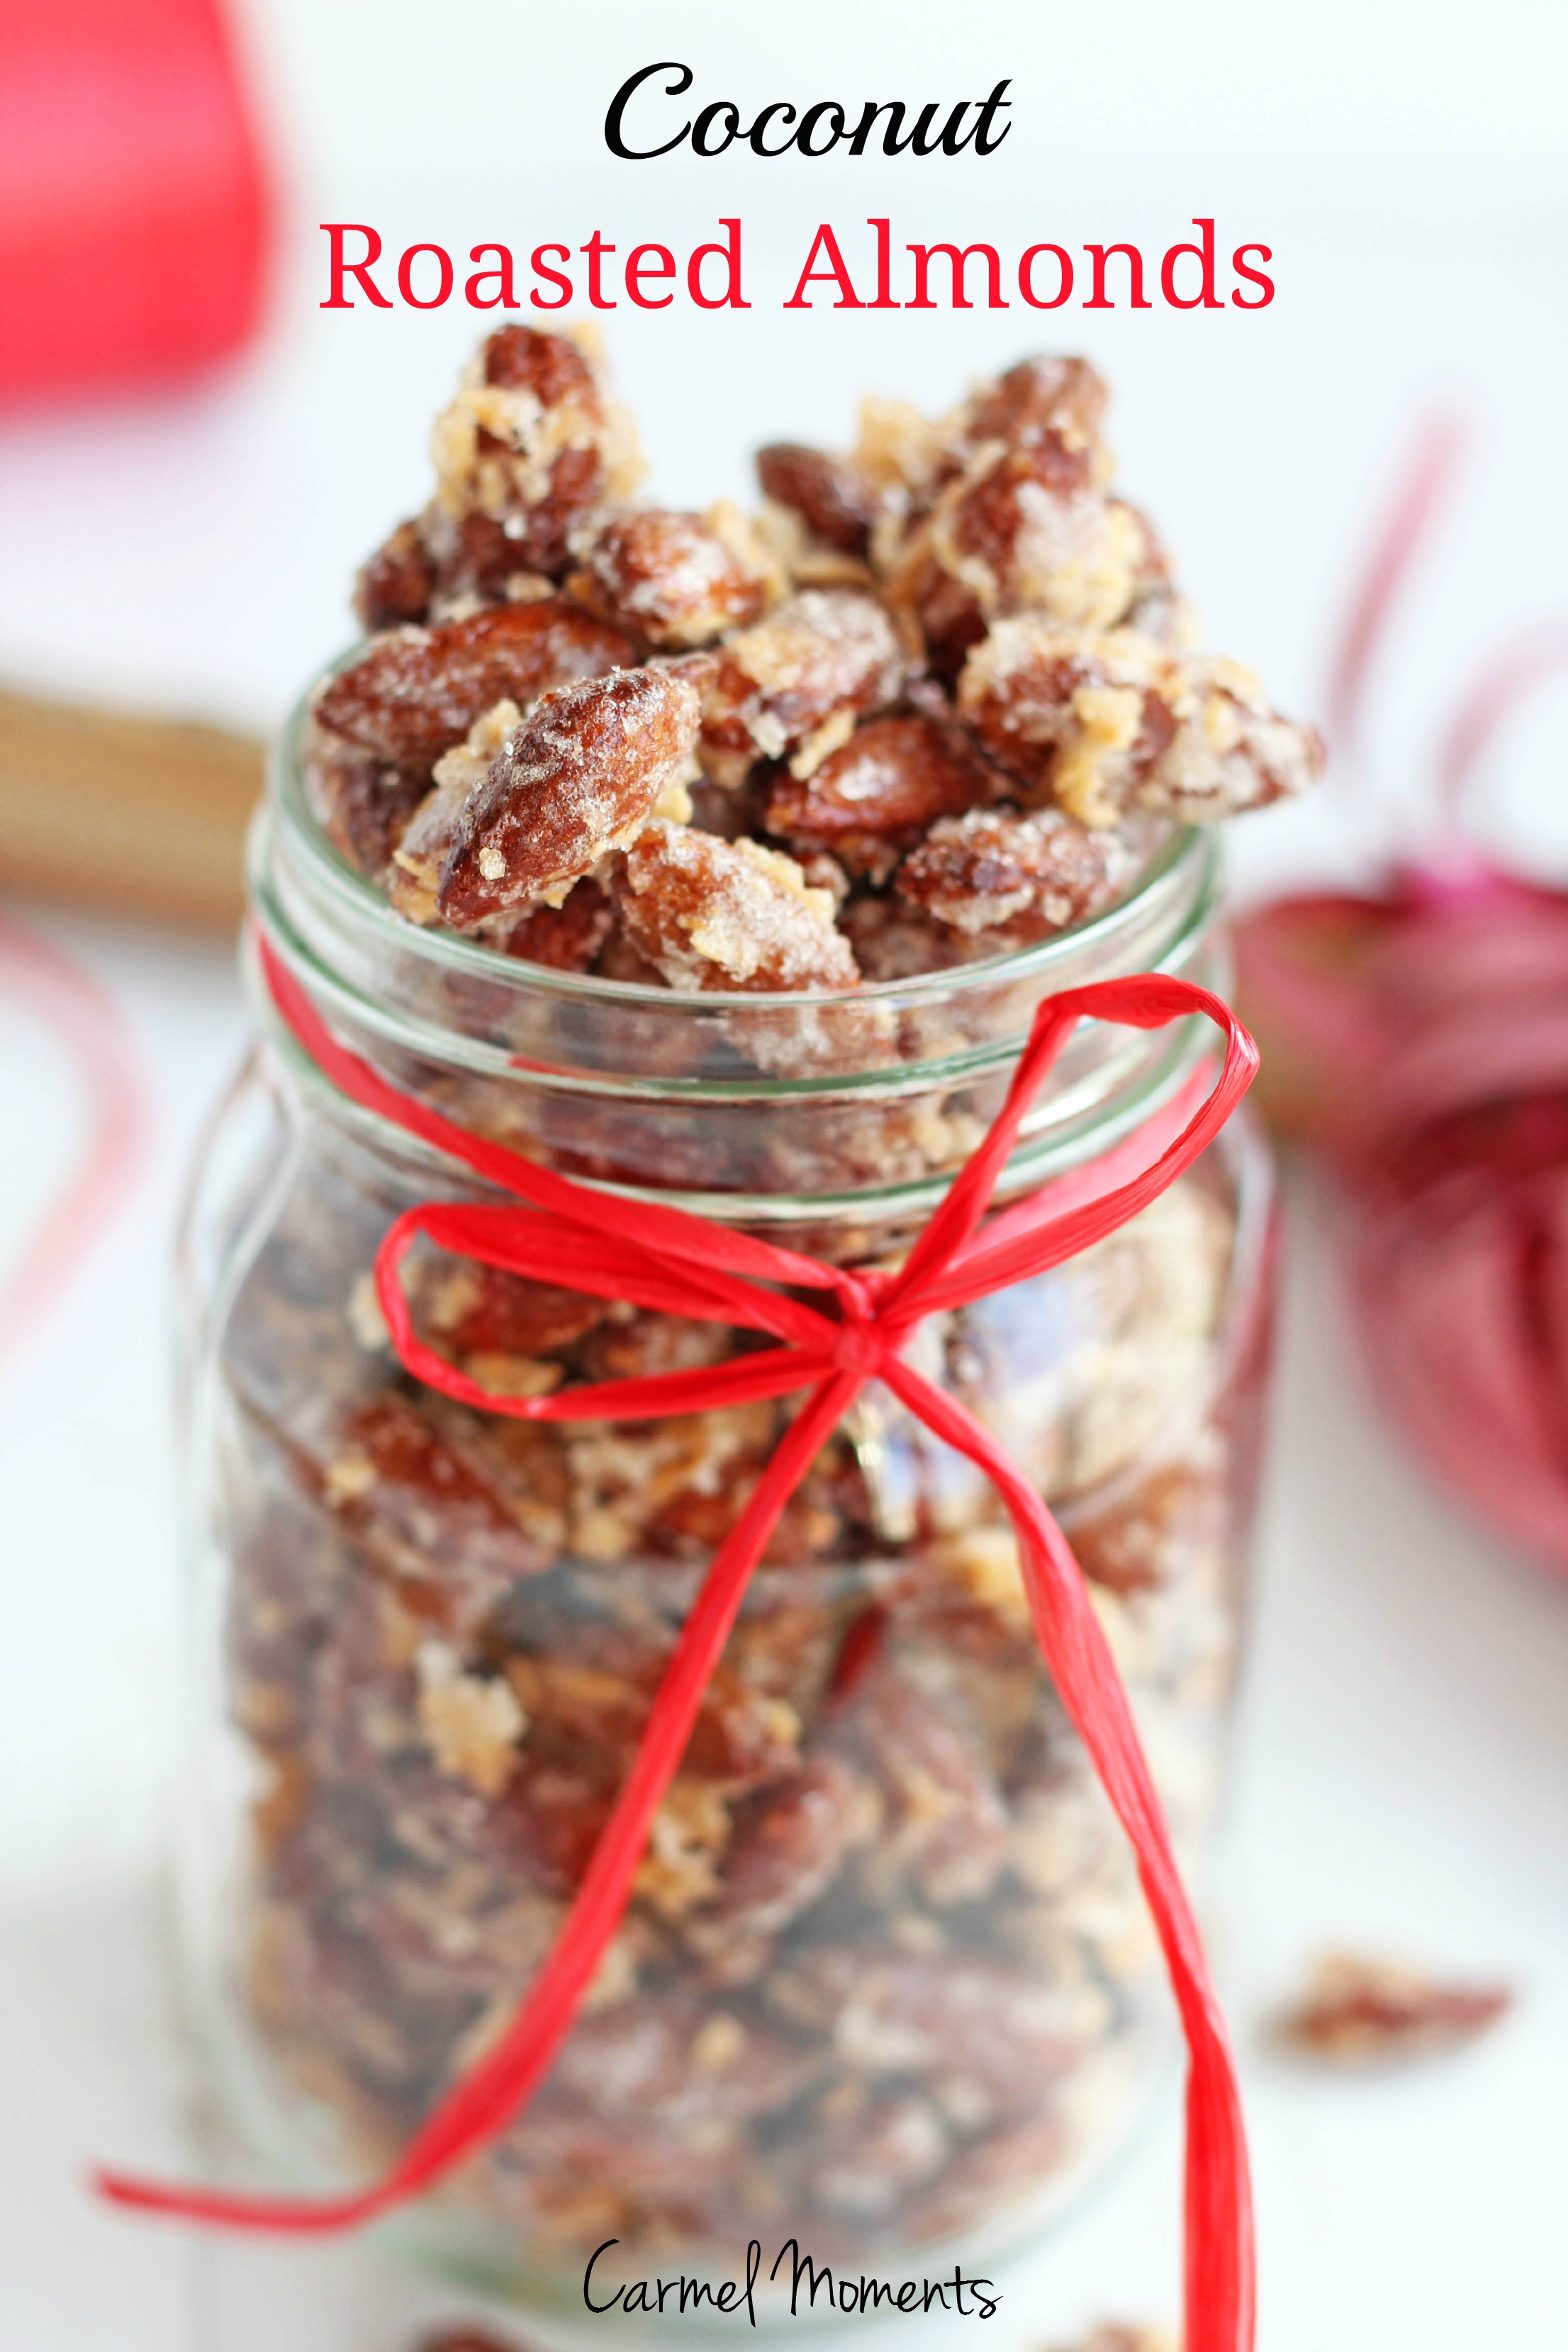 Coconut Roasted Almonds